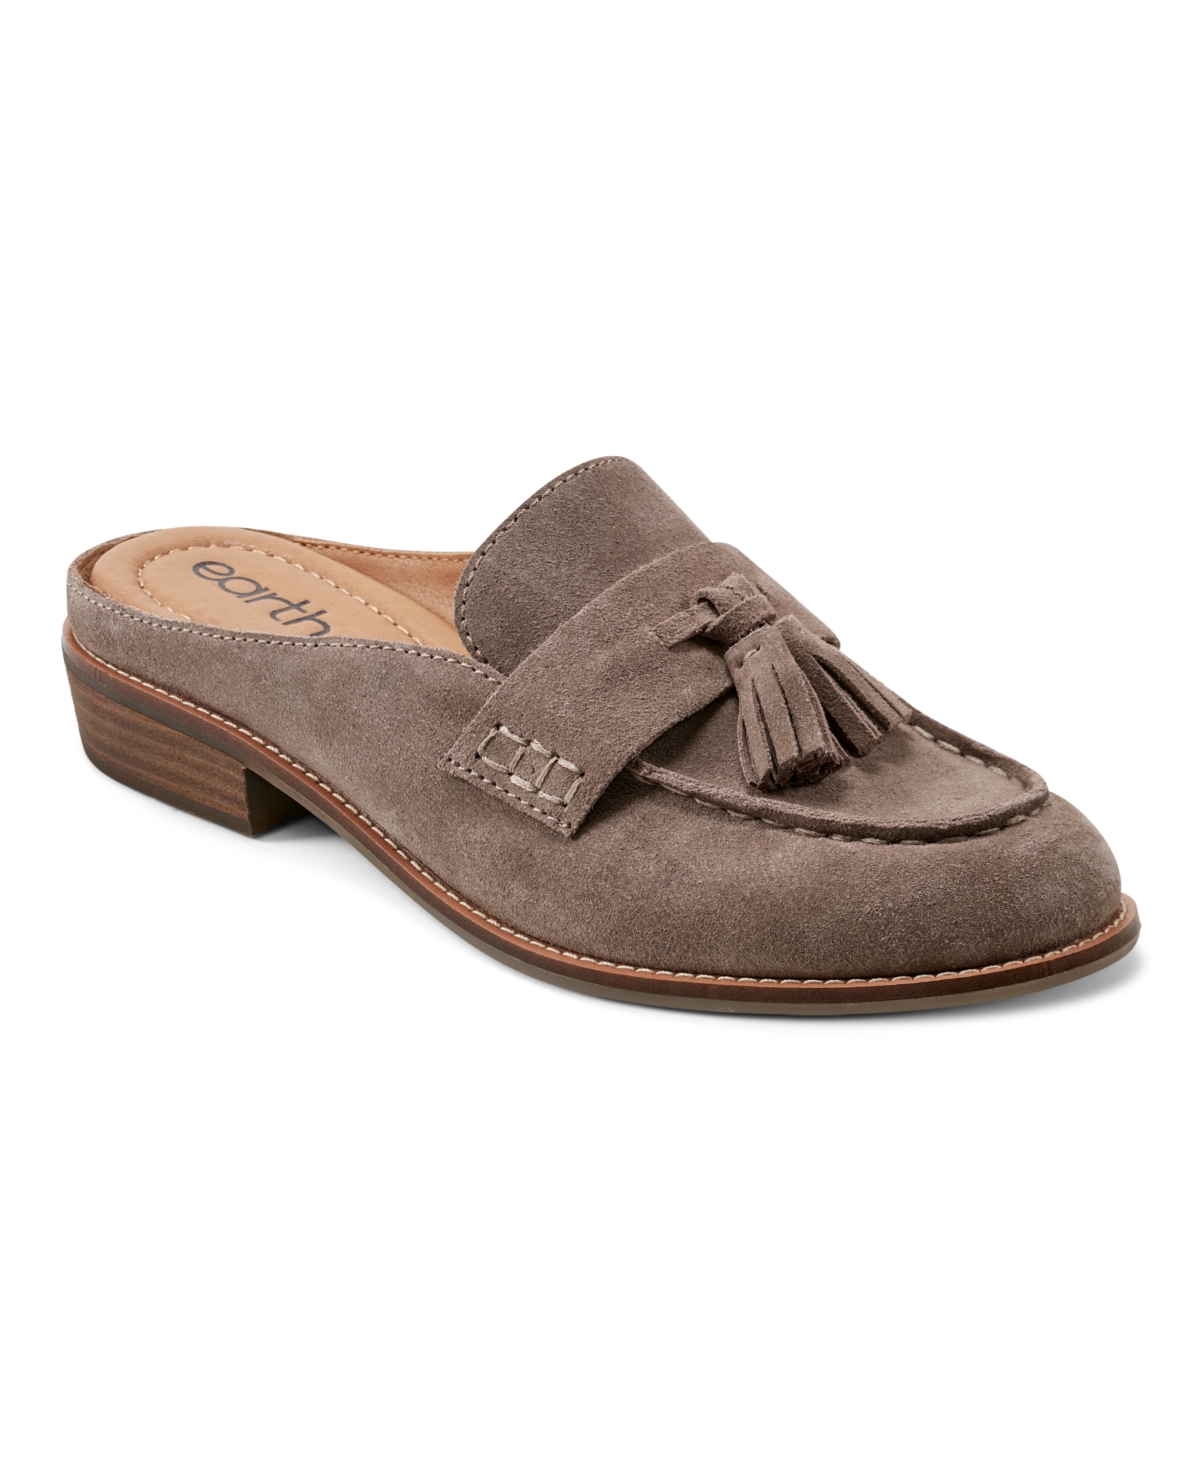 Earth Women's Everett Casual Slip-on Round Toe Loafers - Medium Brown Leather